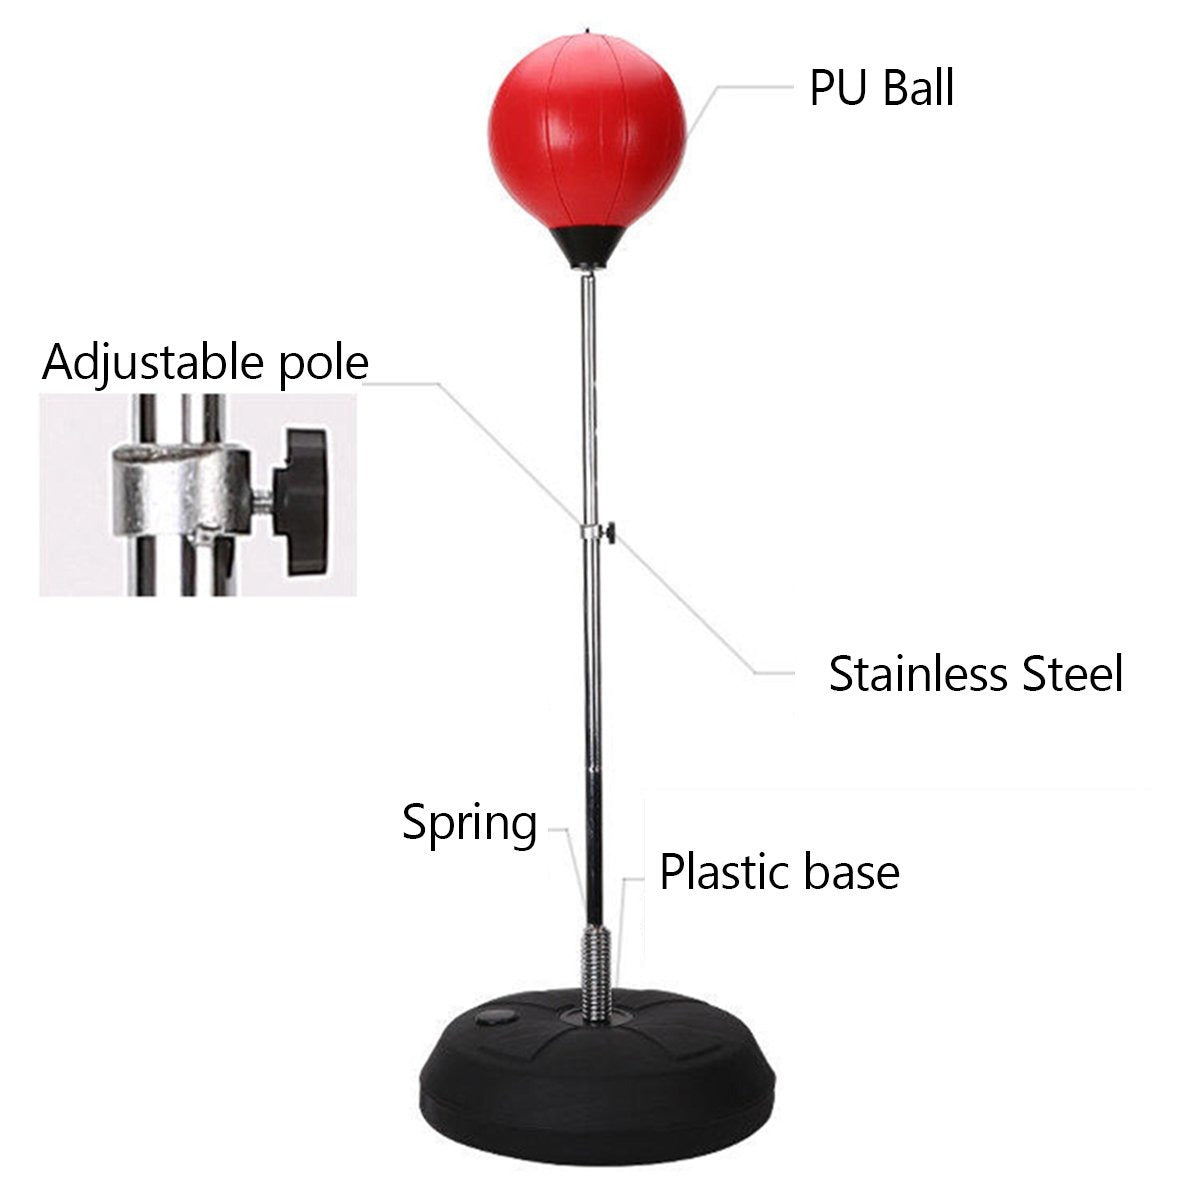 red inflatable punching bag text stainless steel black plastic base spring adjustable pole pu ball